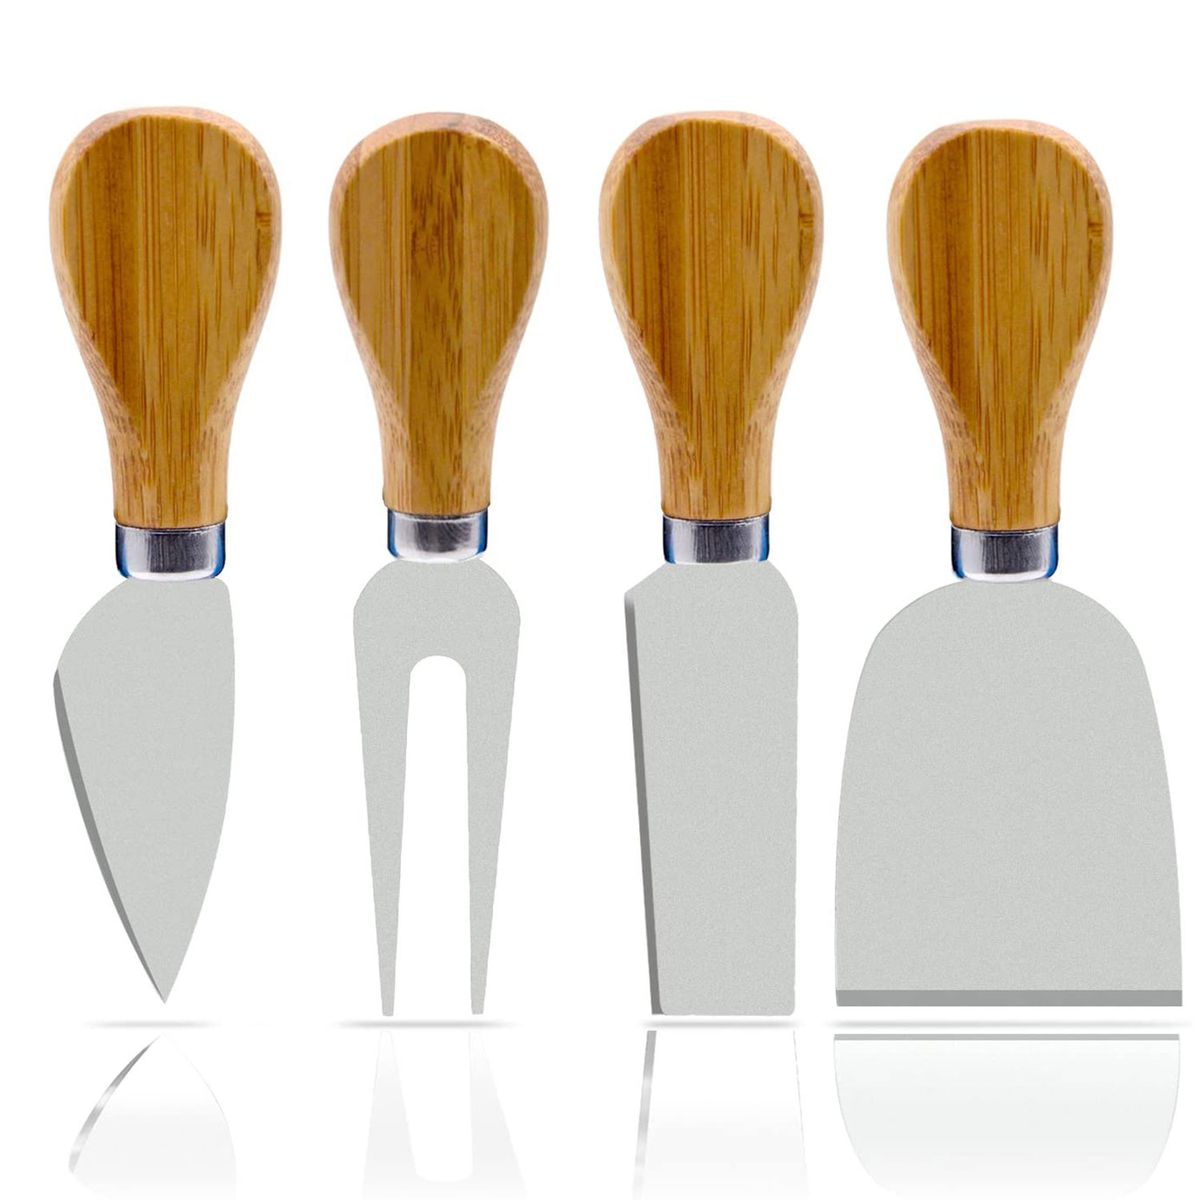 Freehawk 4 Pieces Set Cheese Knives with Bamboo Wood Handle